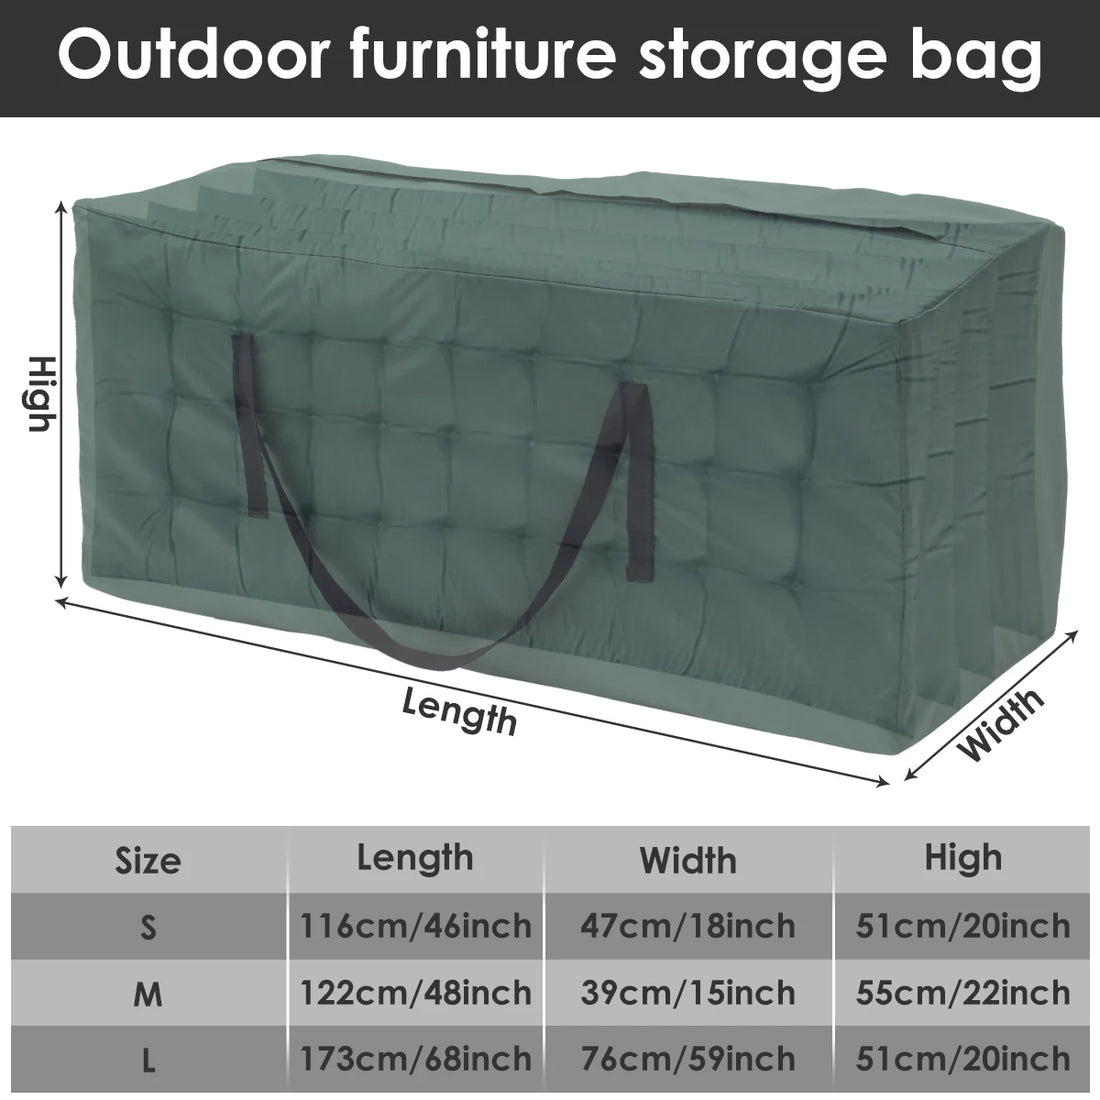  Cushion Storage Bag Large Capacity Furniture Protective Cover Outdoor Garden Waterproof Dustproof Christmas Tree Organizer New #